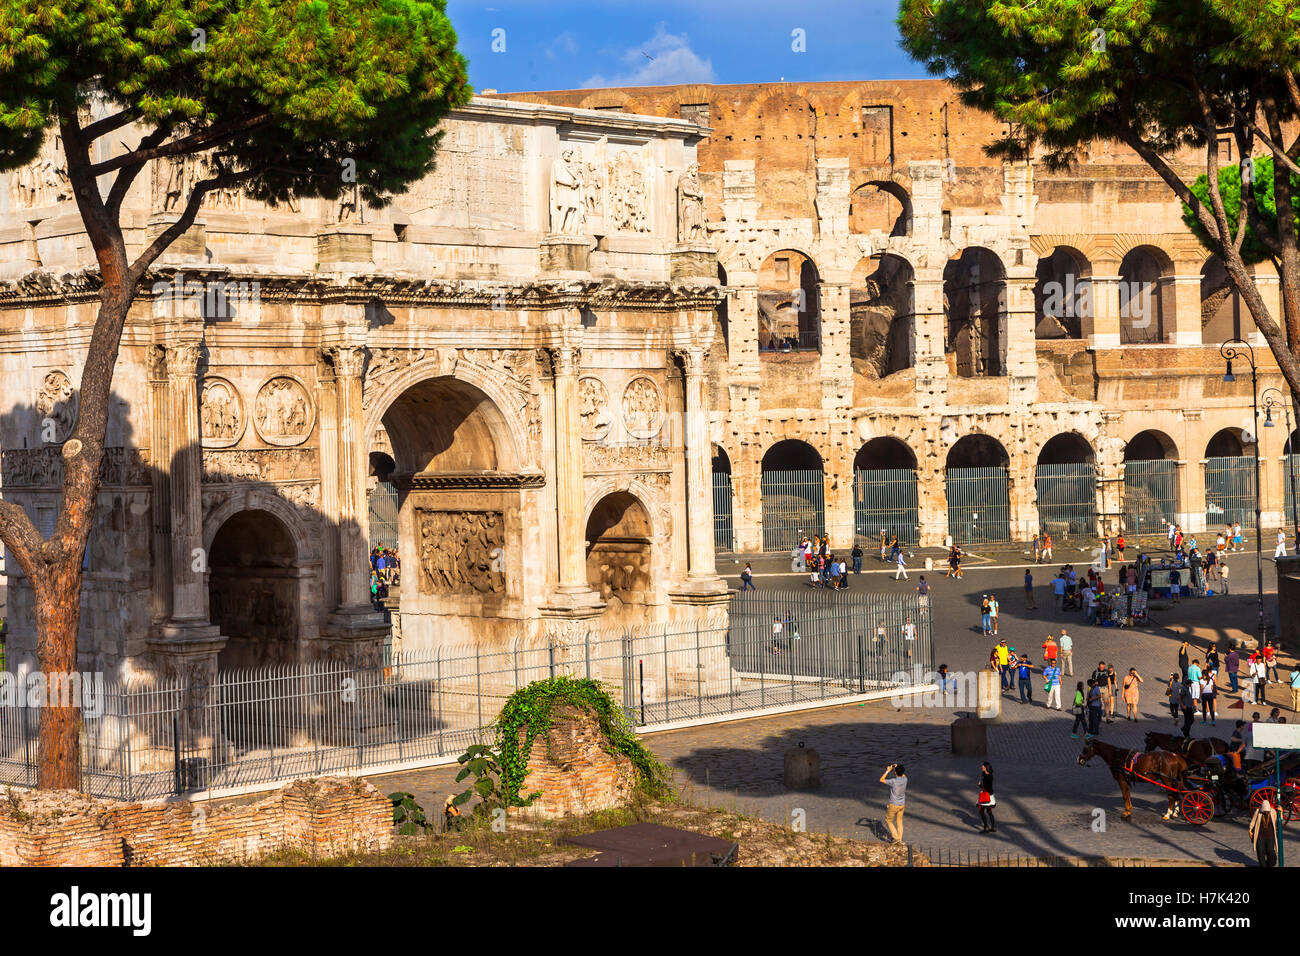 Panoramic image of great Colosseum and arc of Konstantinos. Rome, Italy Stock Photo